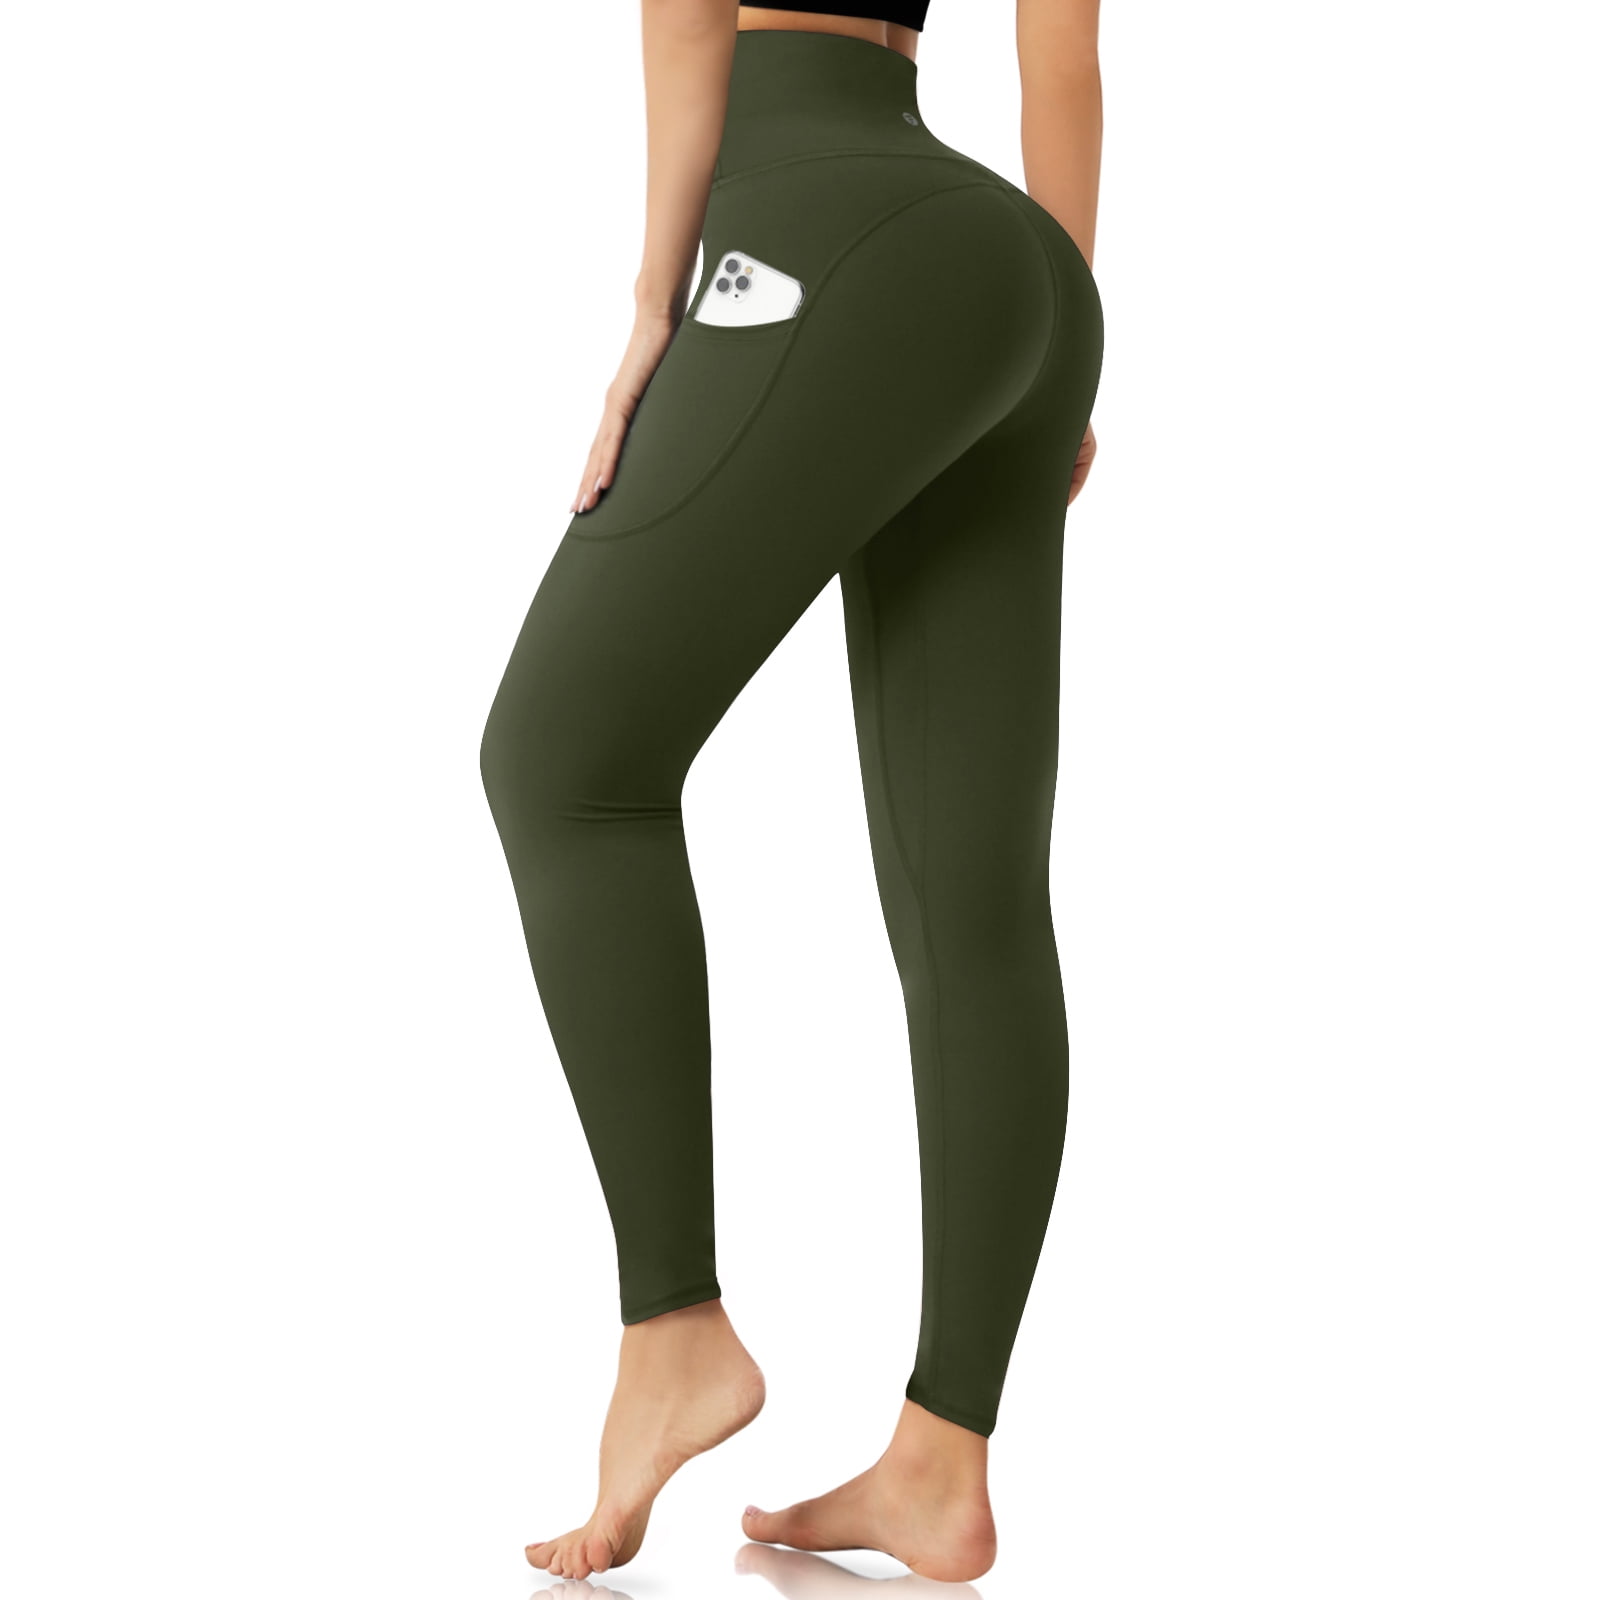 Women's Yoga Pants Sports Trousers Leggings with Pockets, LETSFIT Y01 High  Waisted Elasticity Gym Tights & Leggings Running for Yoga Running 